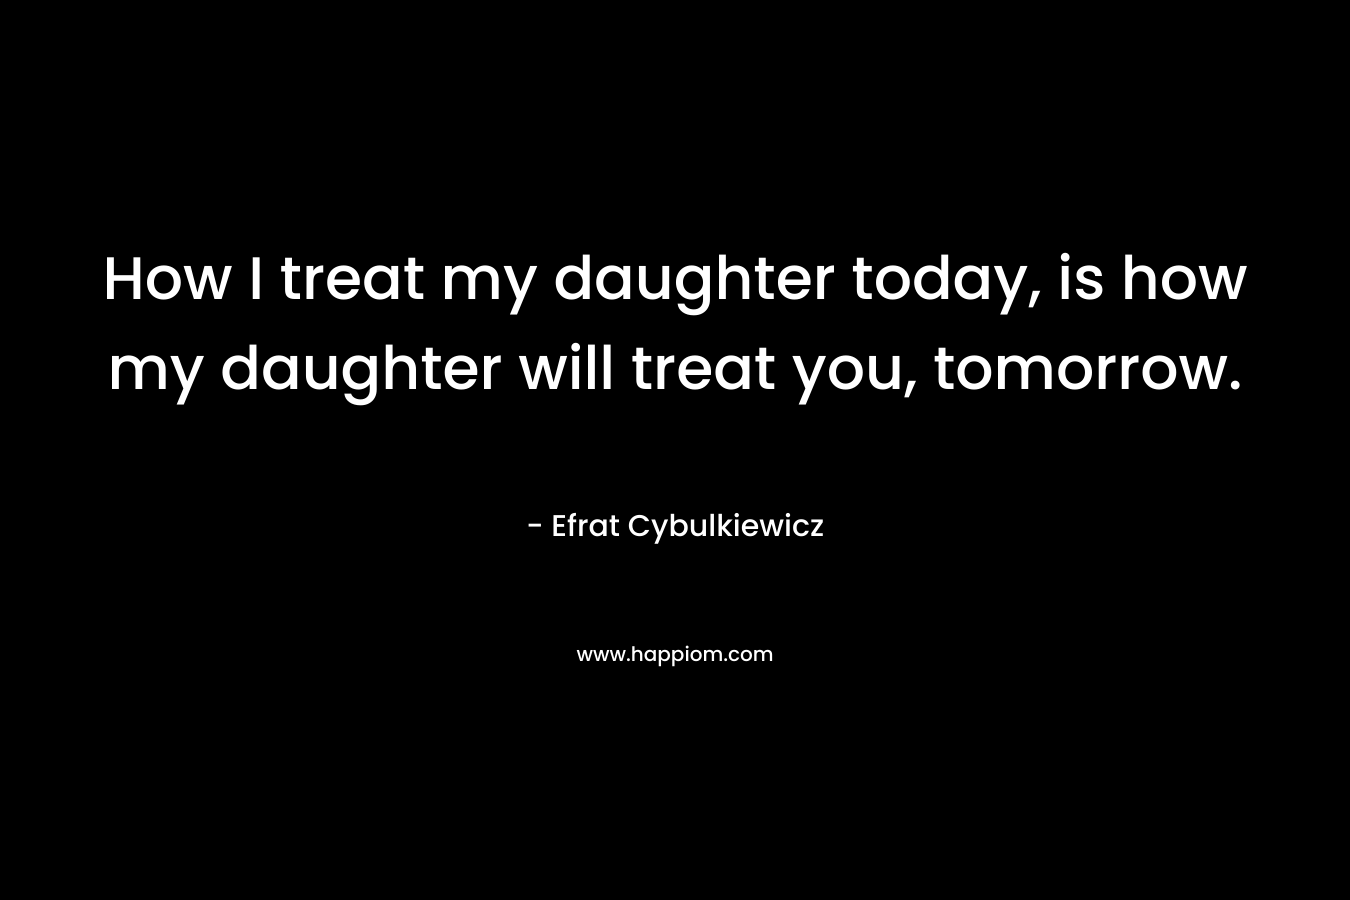 How I treat my daughter today, is how my daughter will treat you, tomorrow.